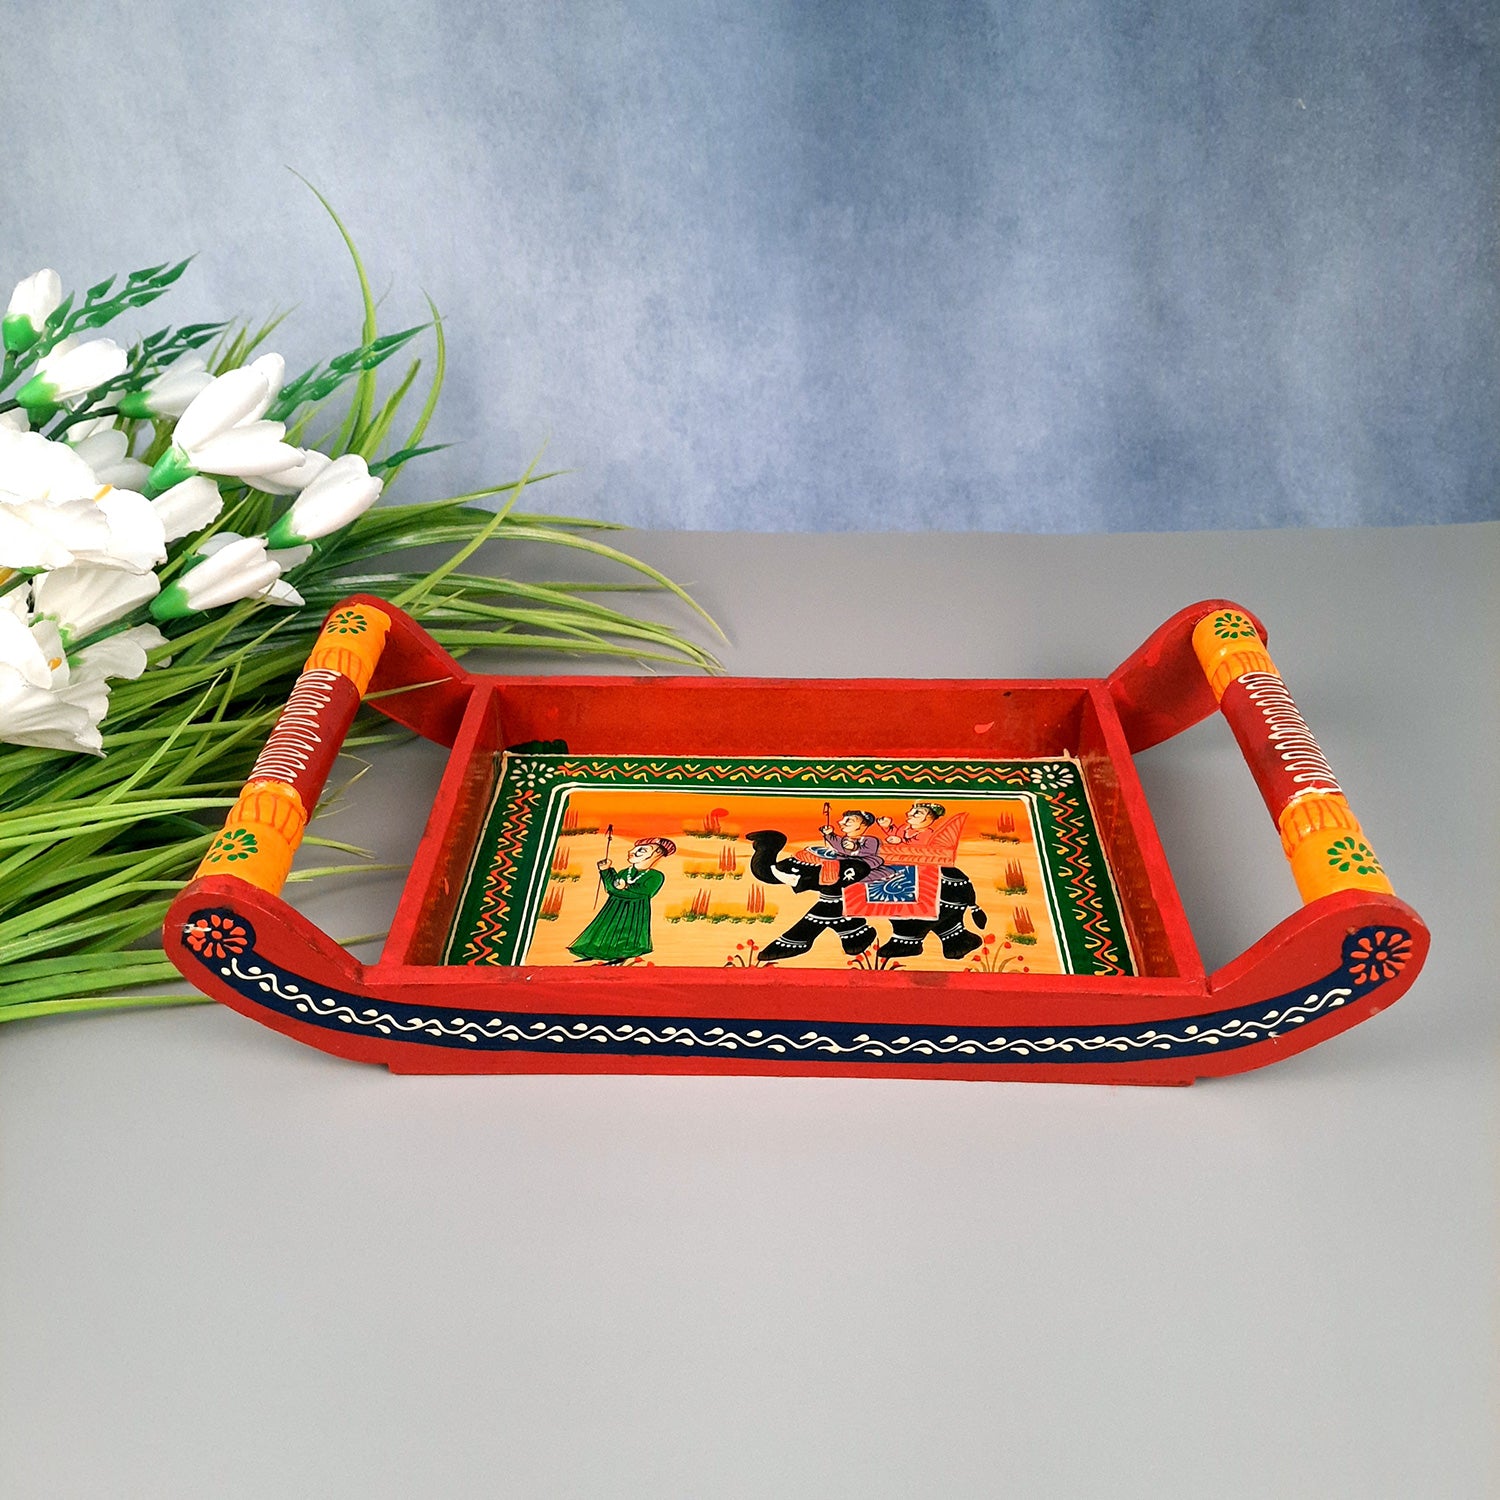 Serving Tray | Tea & Snacks Serving Platter Wooden | Tray With Handles - for Home, Dining Table, Kitchen Decor, Restaurants, Office, Cafe & Gifts - 13 Inch - Apkamart